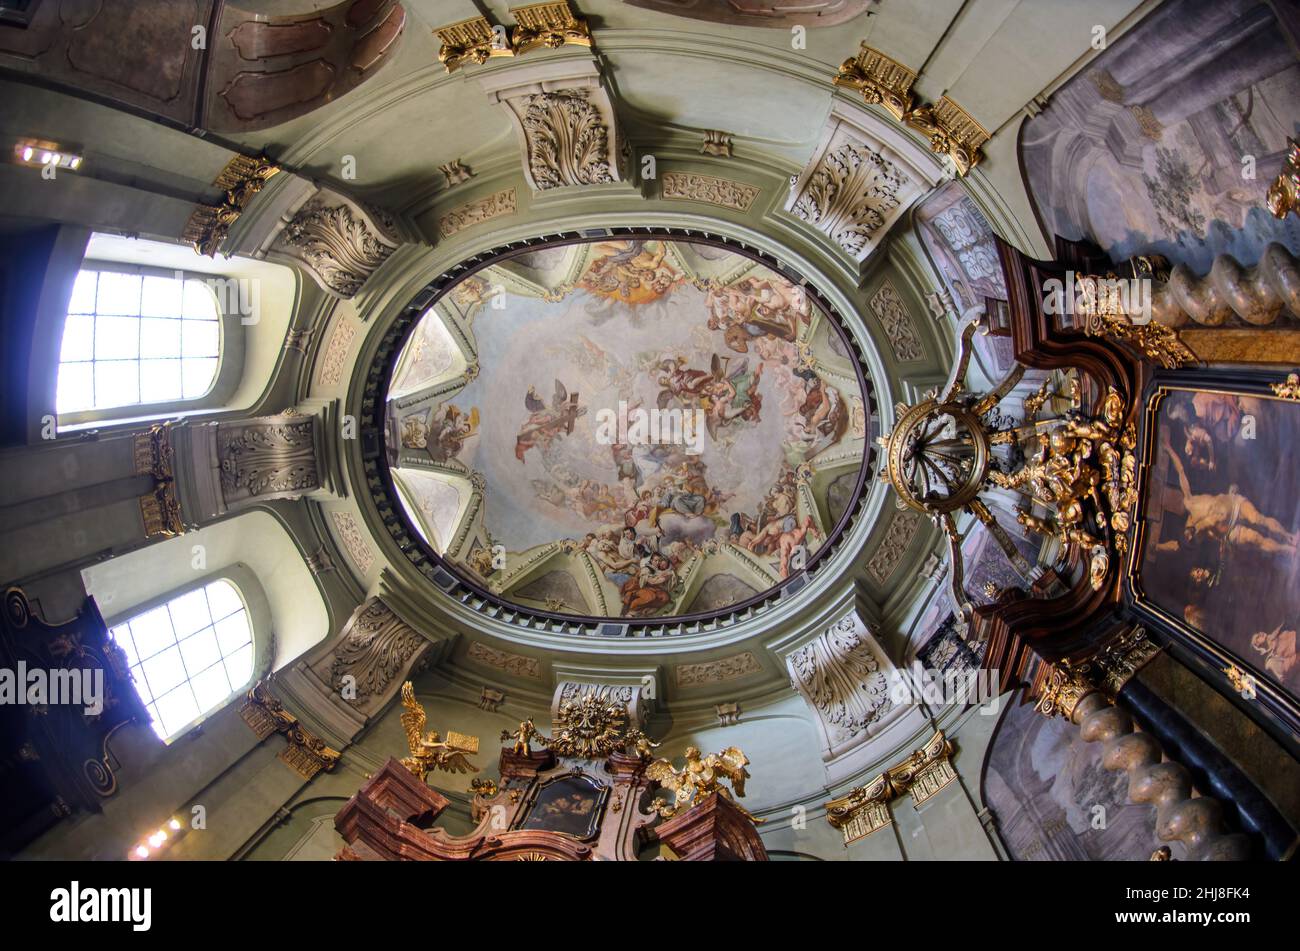 Interior of St Nicholas Church at Mala Strana (Kostel sv. Mikulase) in Prague, Czech Republic. Cathedral in old town. Famous landmark in the city. Stock Photo